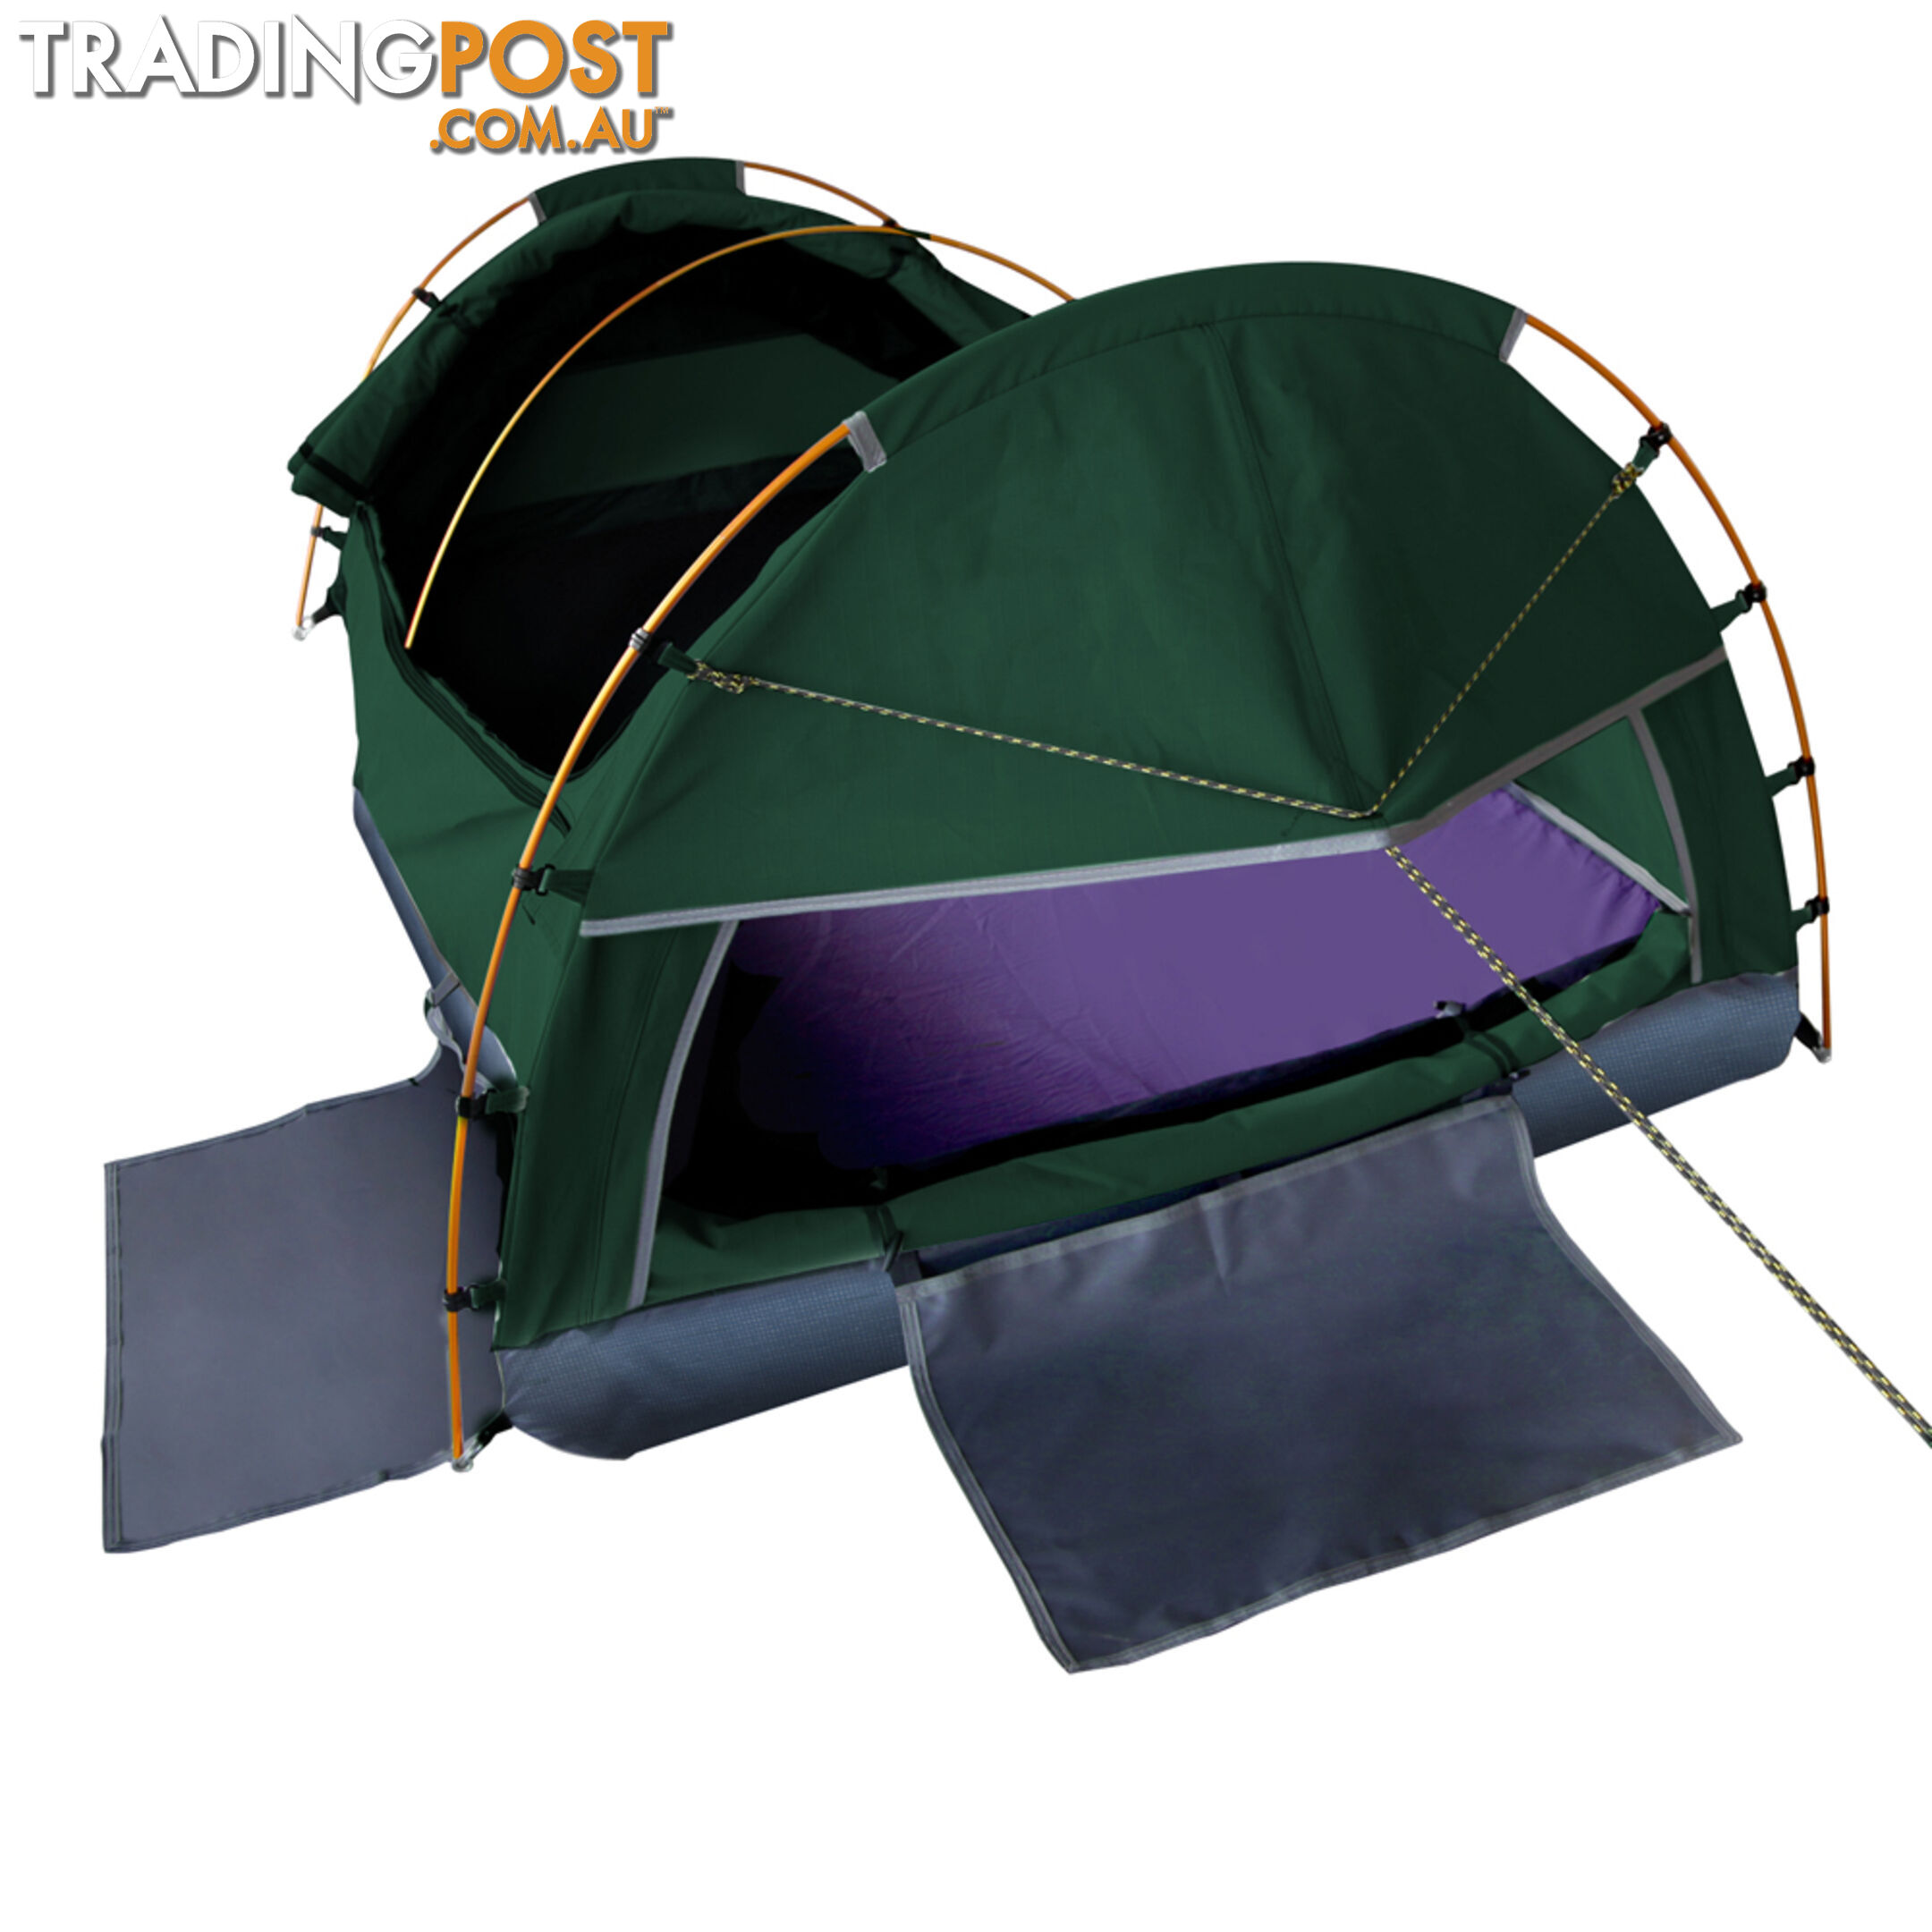 Double Camping Canvas Swag Tent Green w/ Air Pillow